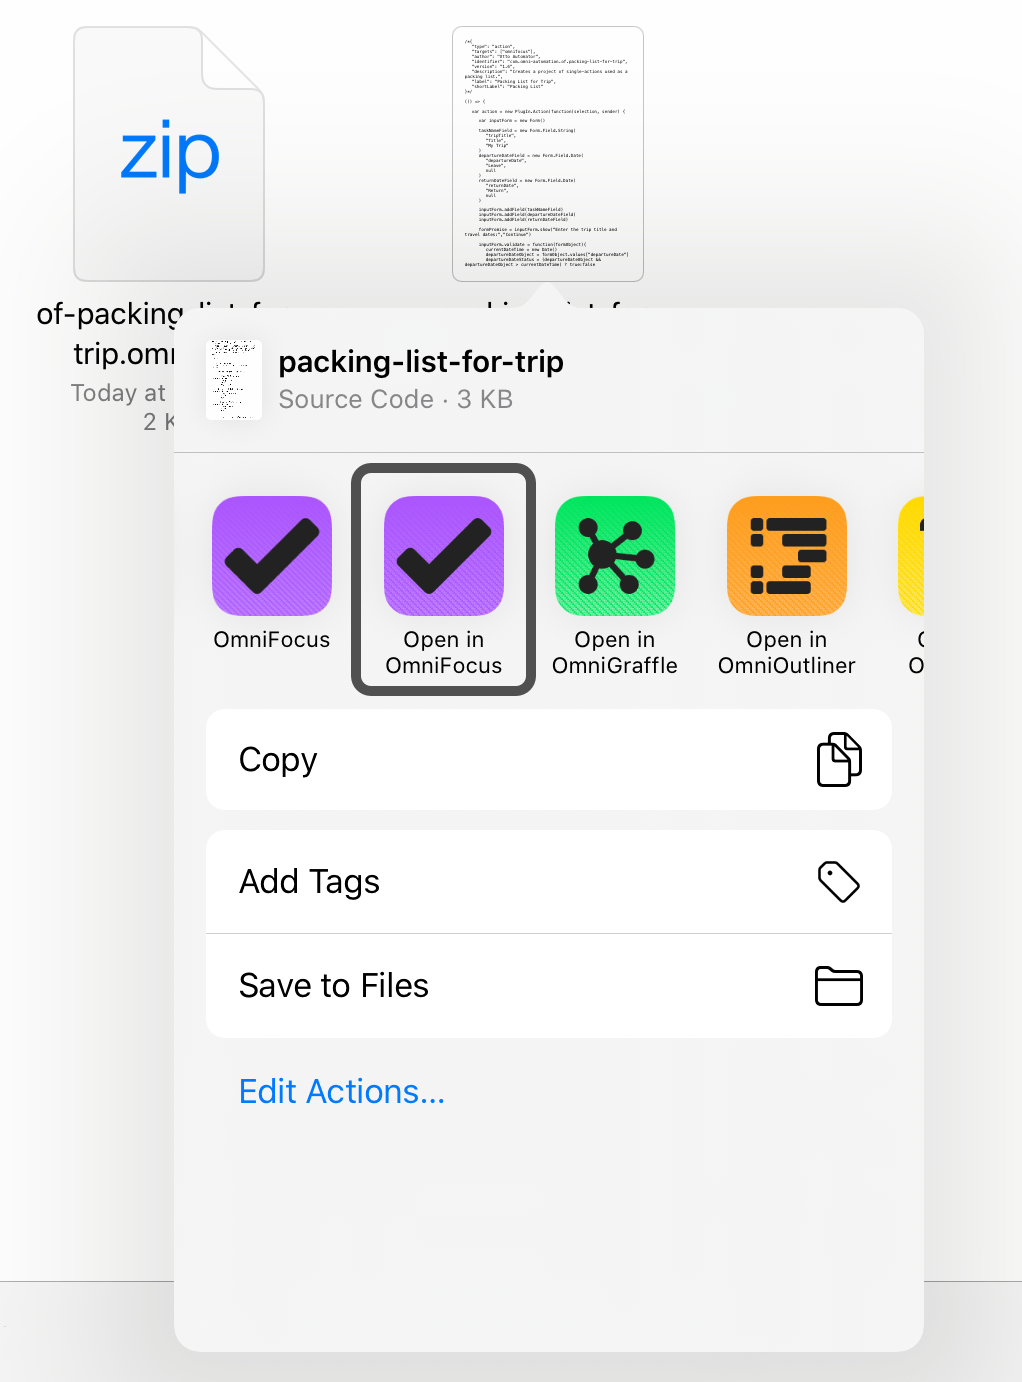 Using the Share menu to Open the Plug-In in OmniFocus.